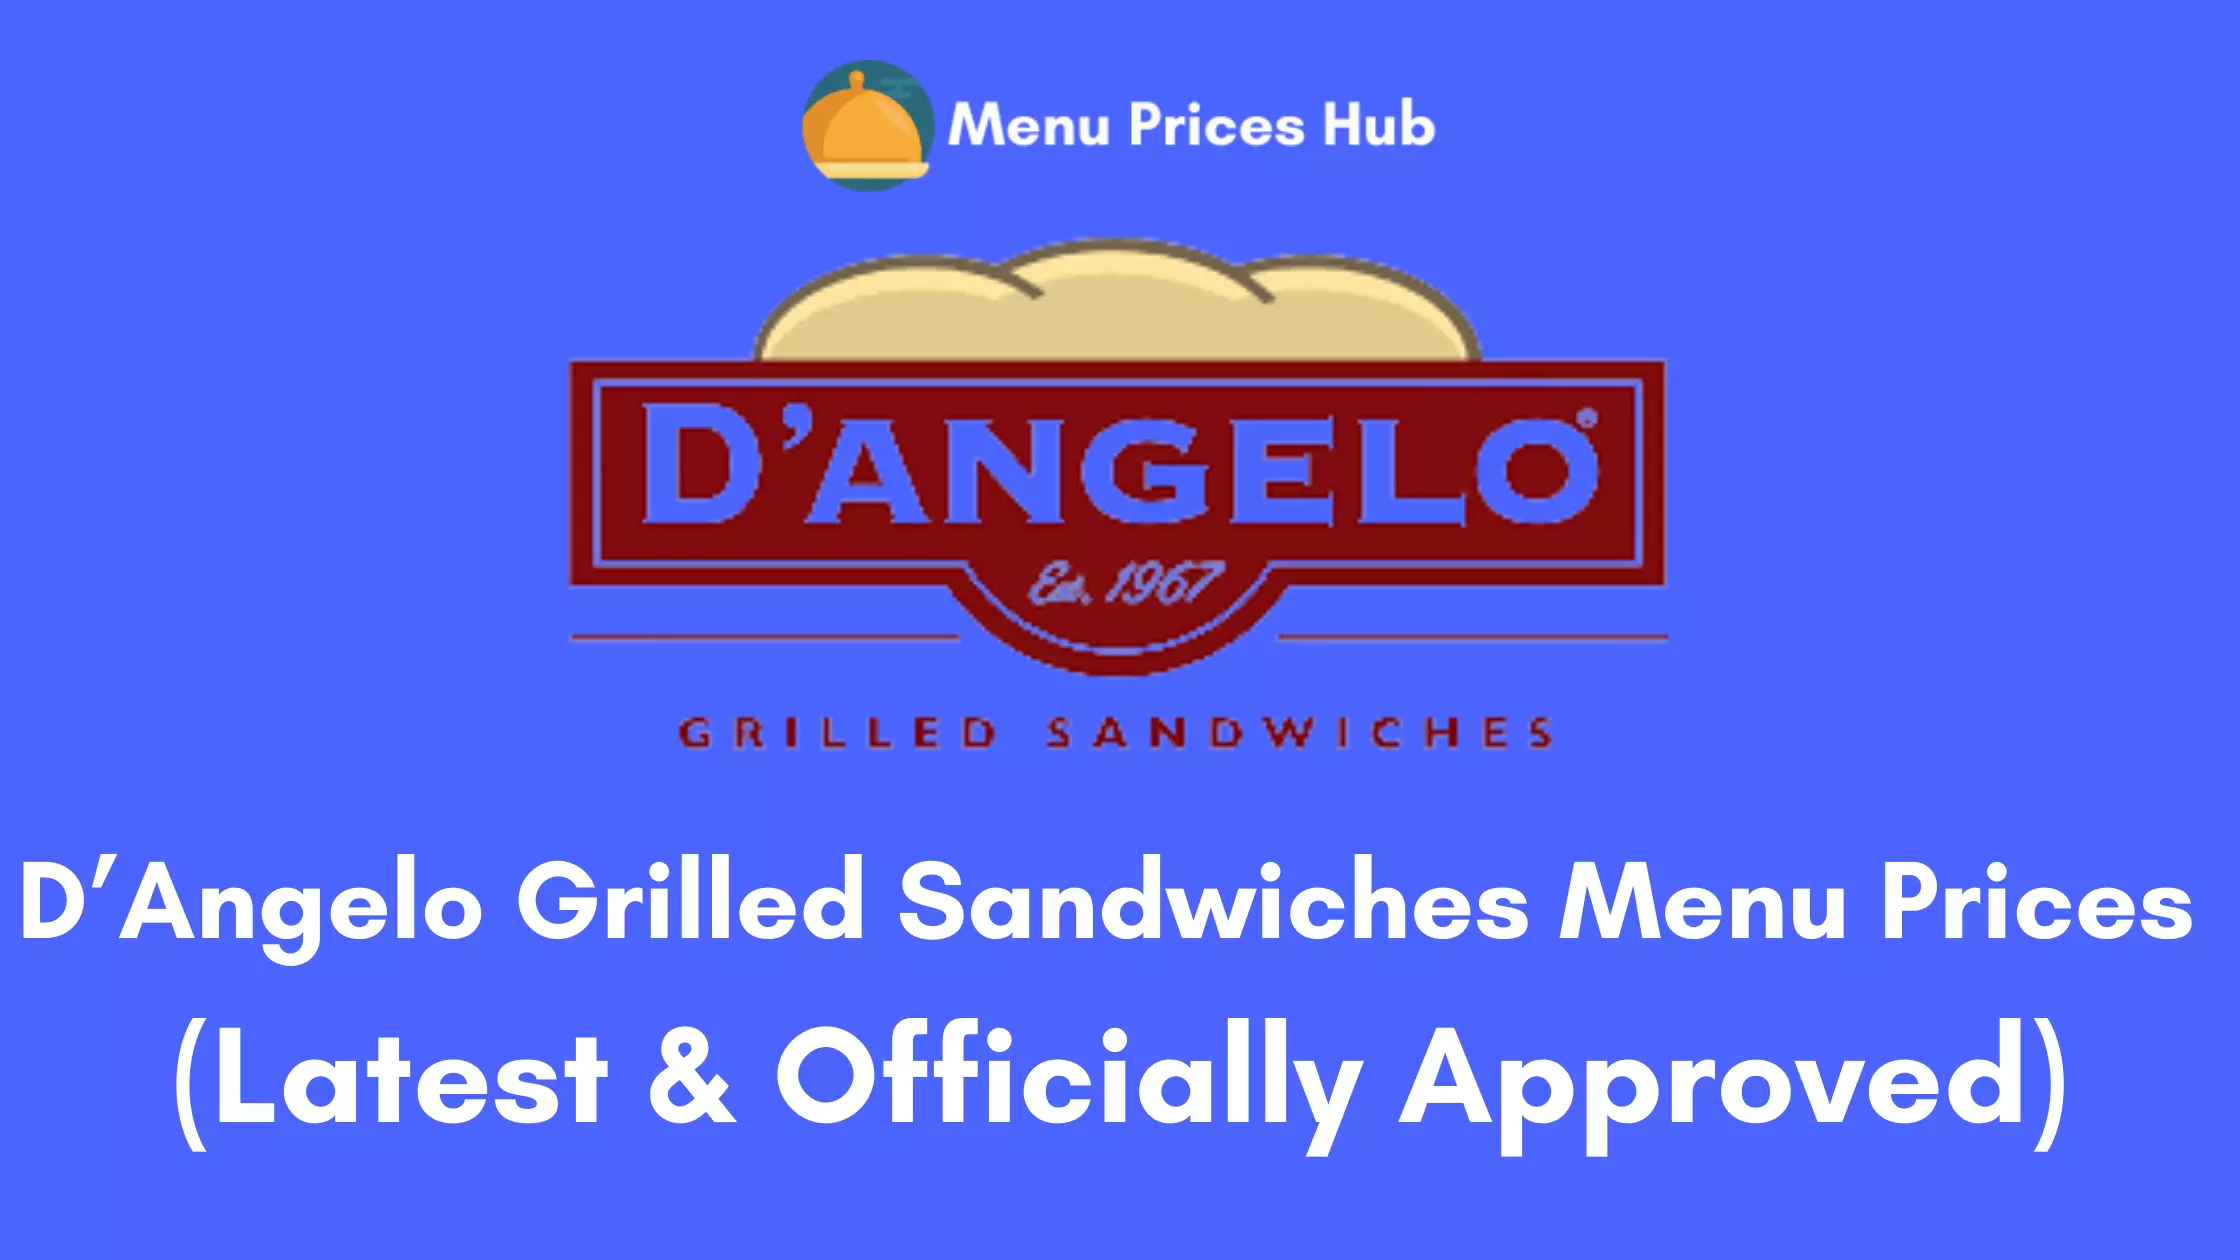 D’Angelo Grilled Sandwiches Menu Prices